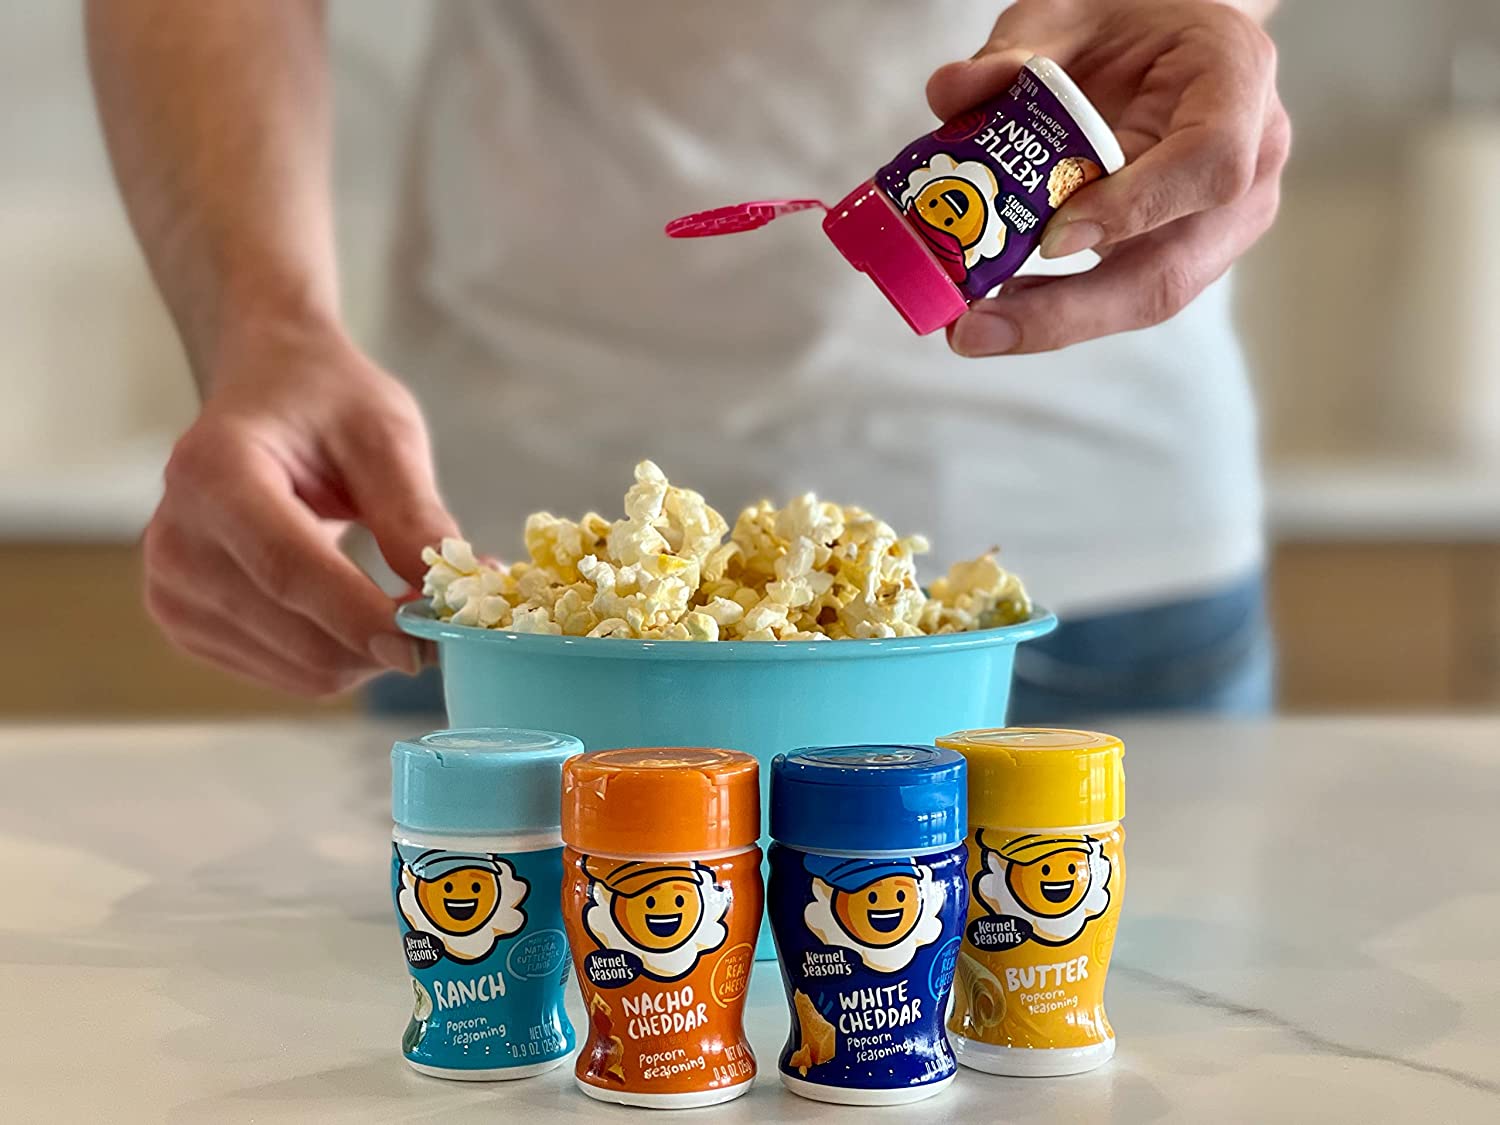 4 different flavored popcorn seasoning jars. Someone is using a fifth jar to sprinkle some seasoning on freshly cooked popcorn.